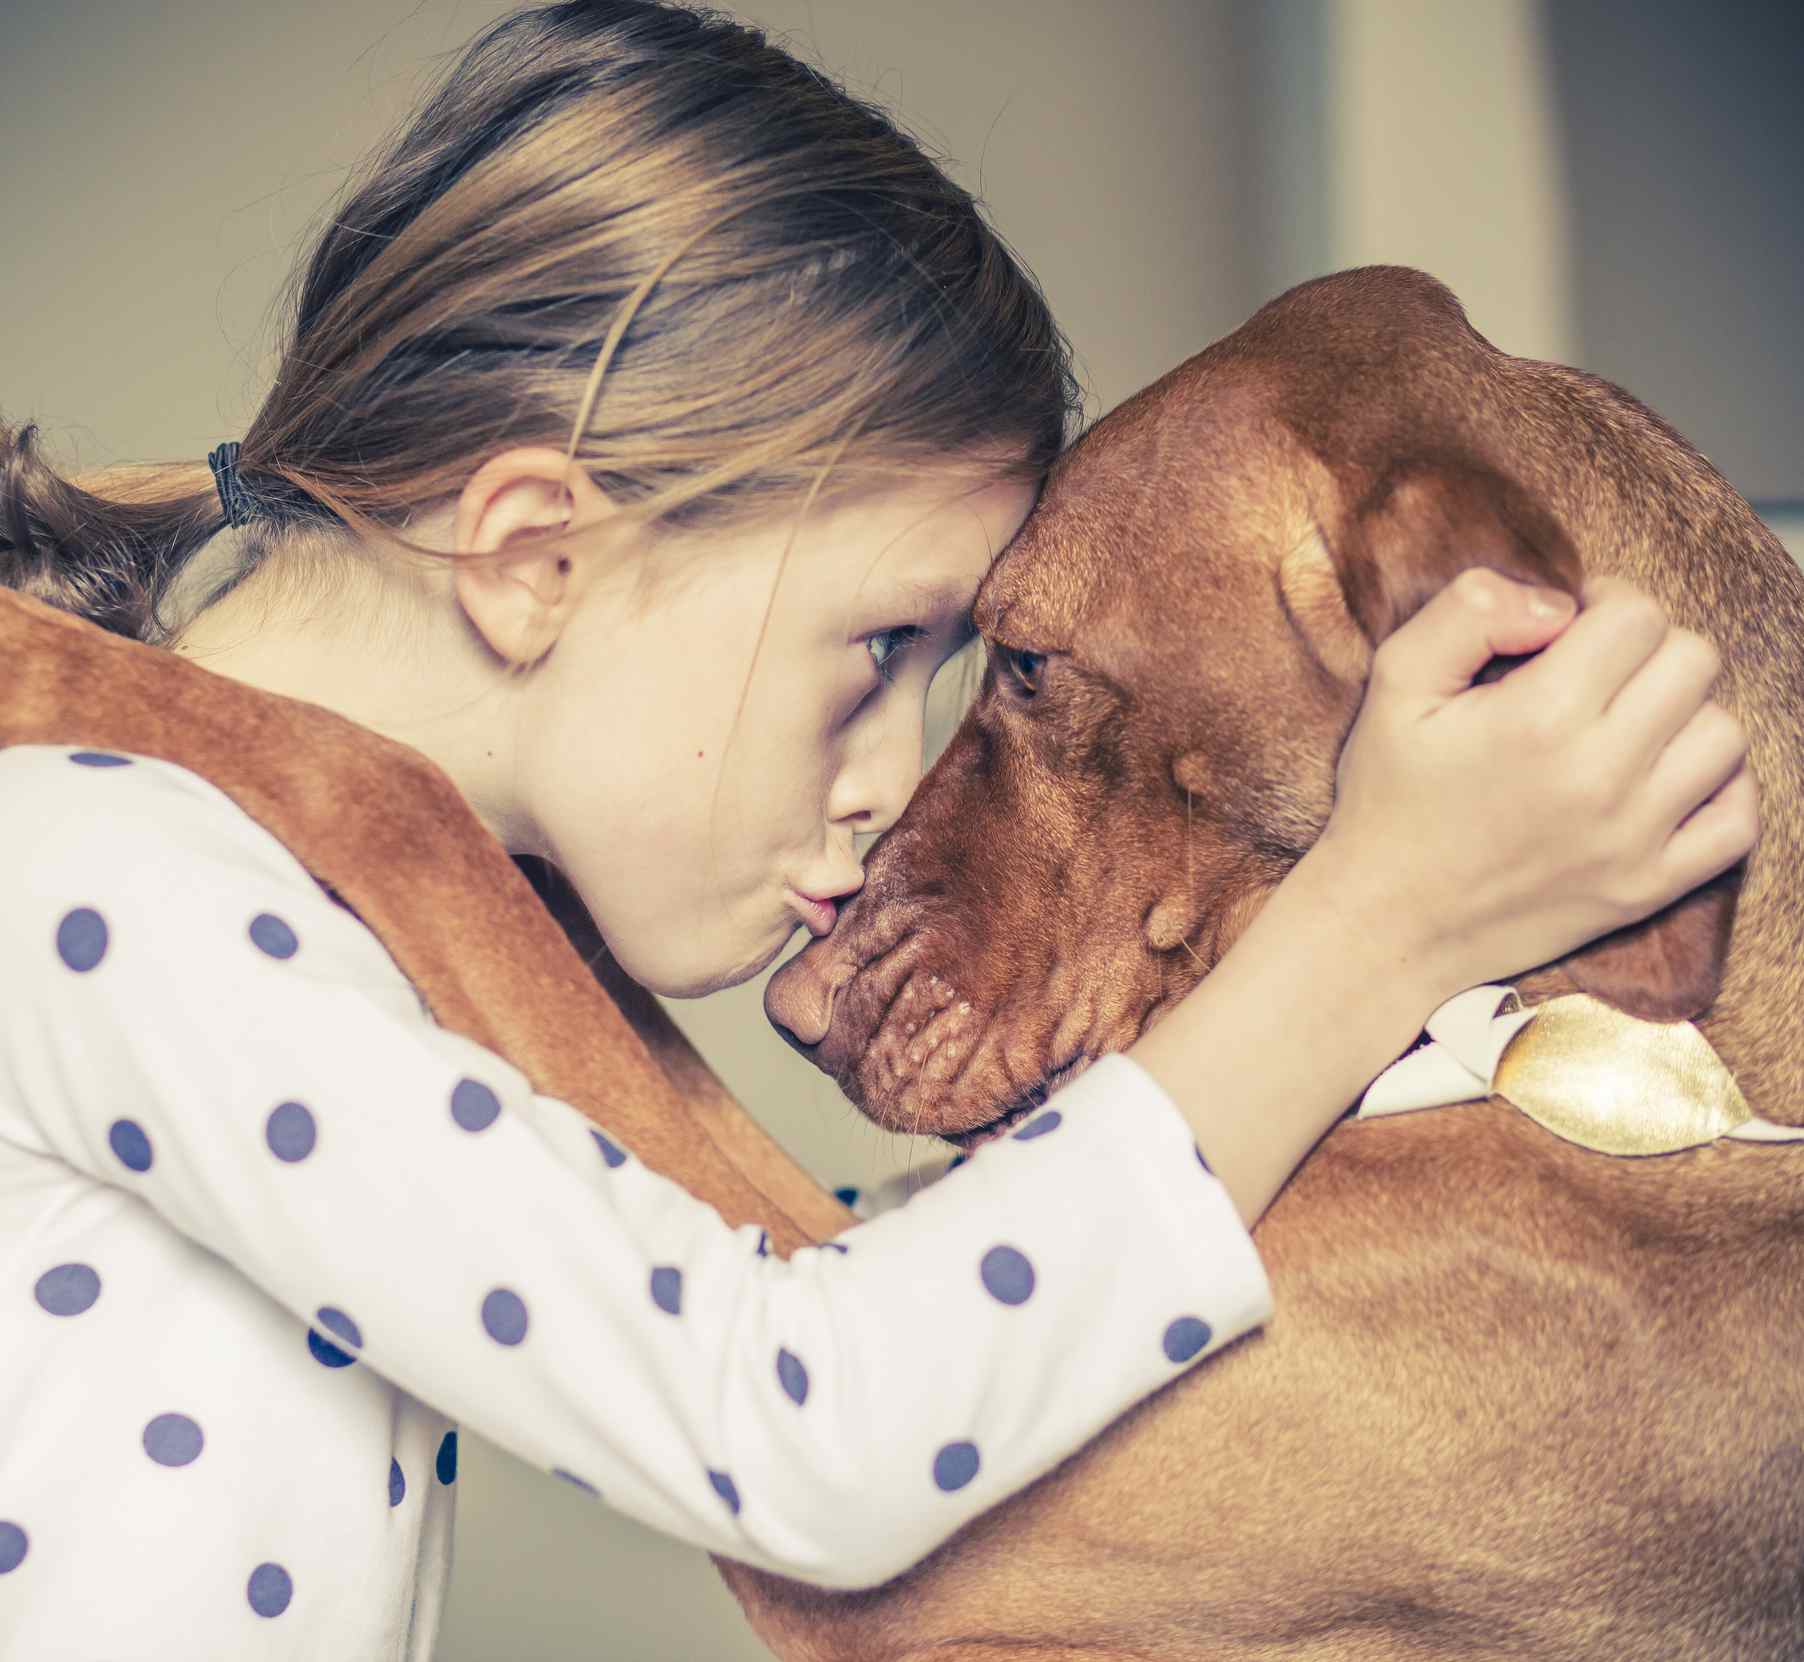 A hug between a young girl and her pet dog